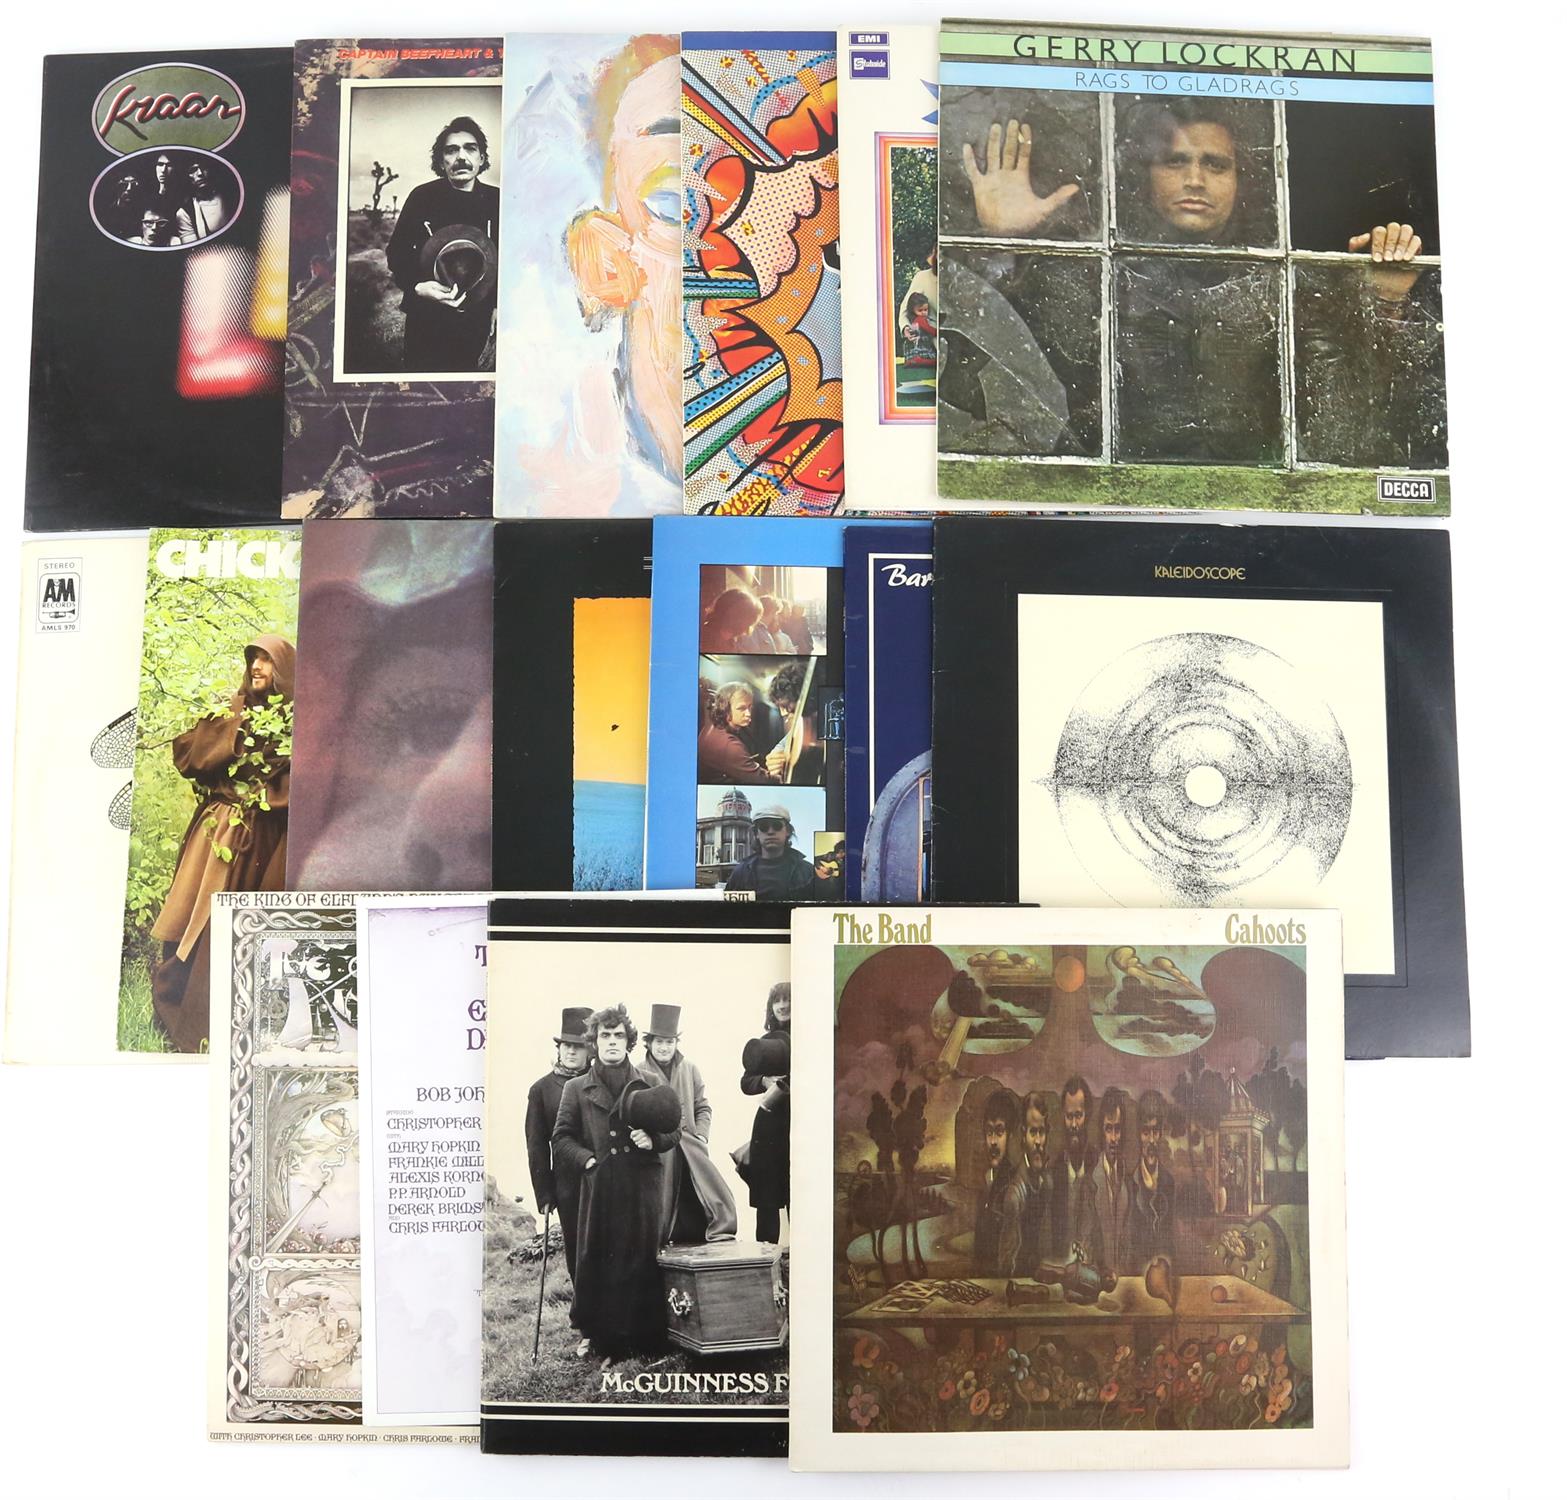 16 Mainly folk / acoustic rock LPs from the 1970s with early pressings of The Band’s “Cahoot” in - Image 2 of 2